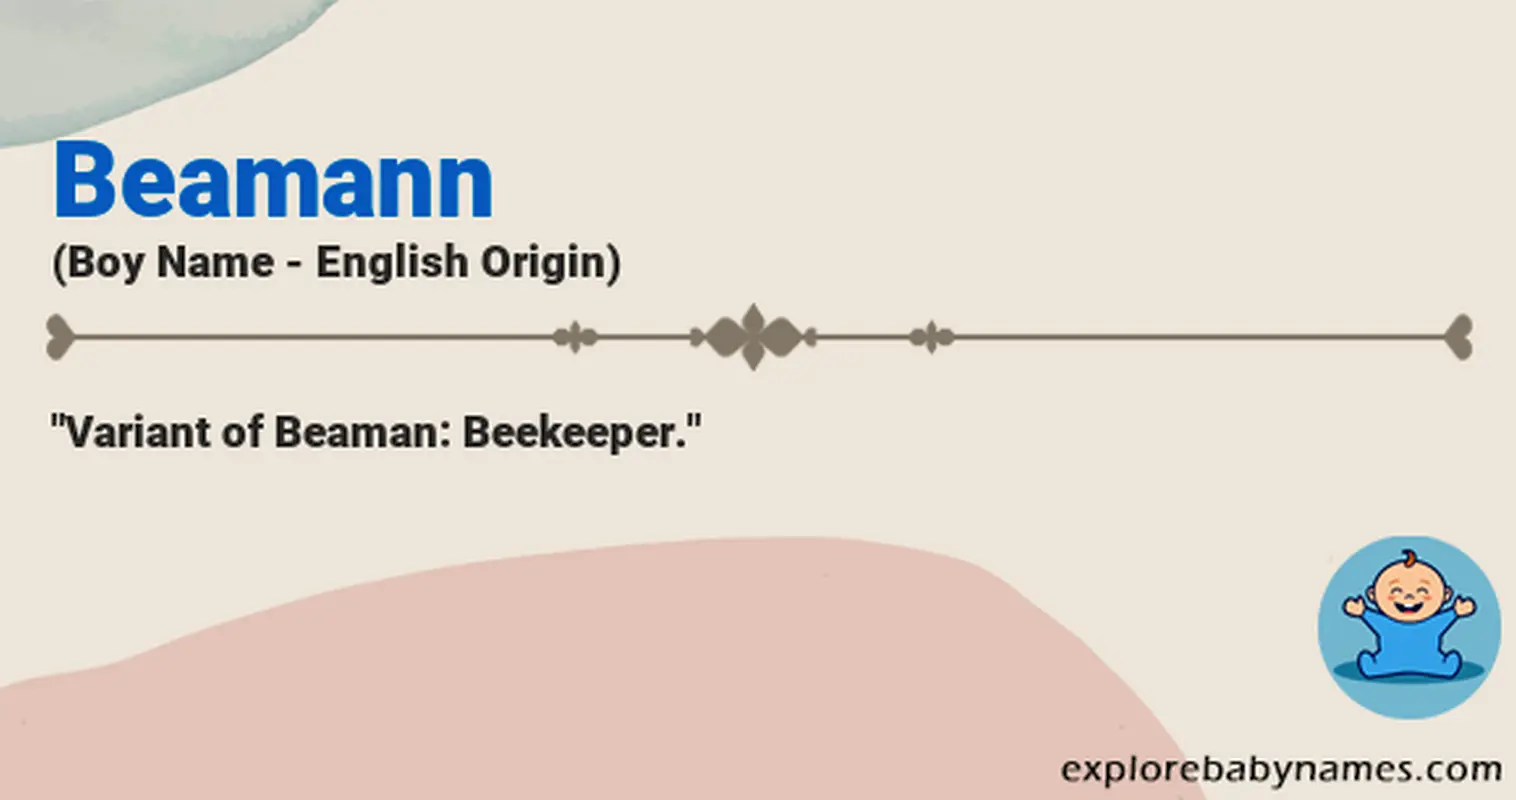 Meaning of Beamann